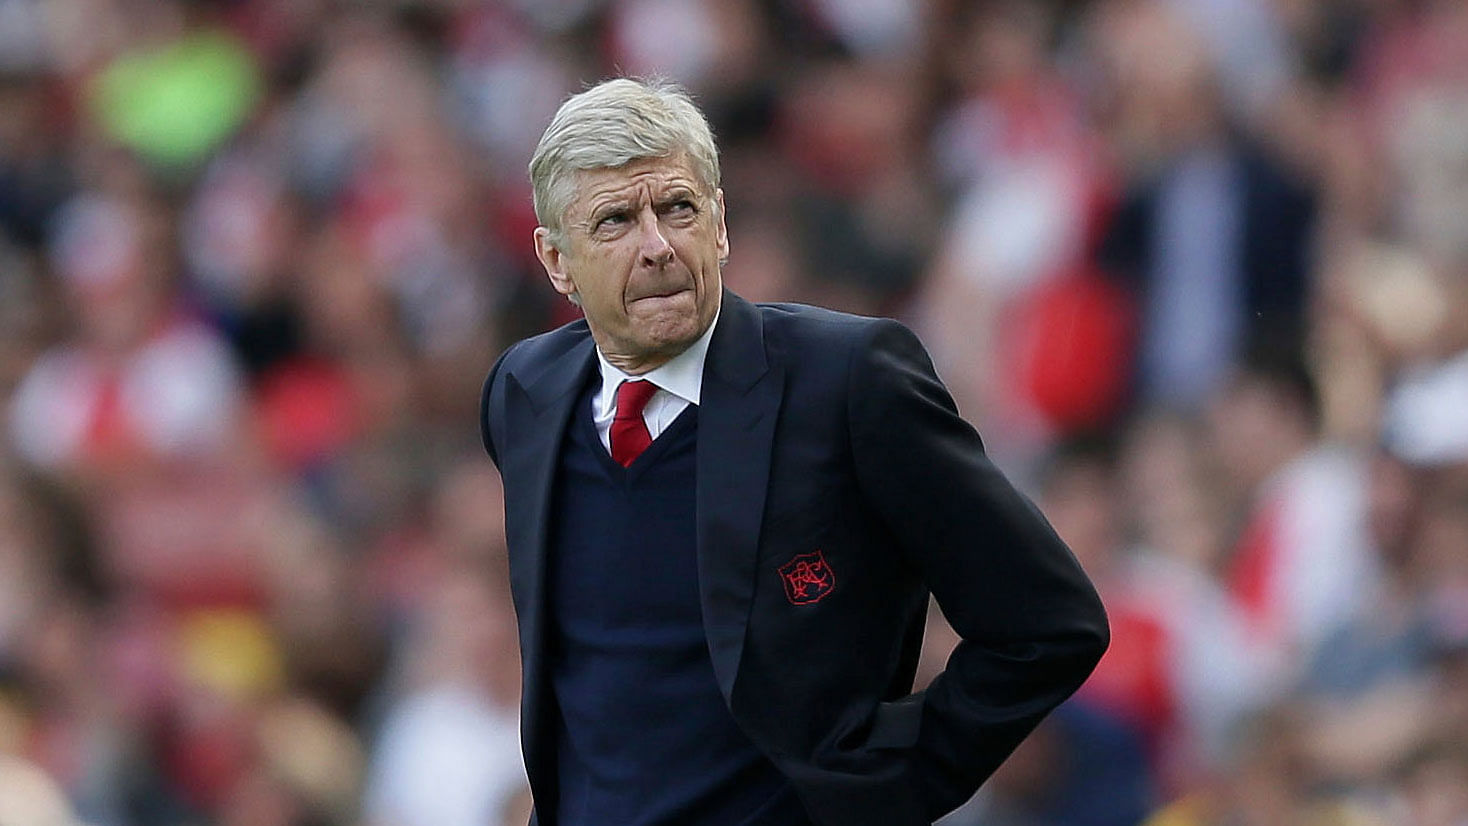 Arsenal manager Arsene Wenger  is set to leave the club at the end of the season.